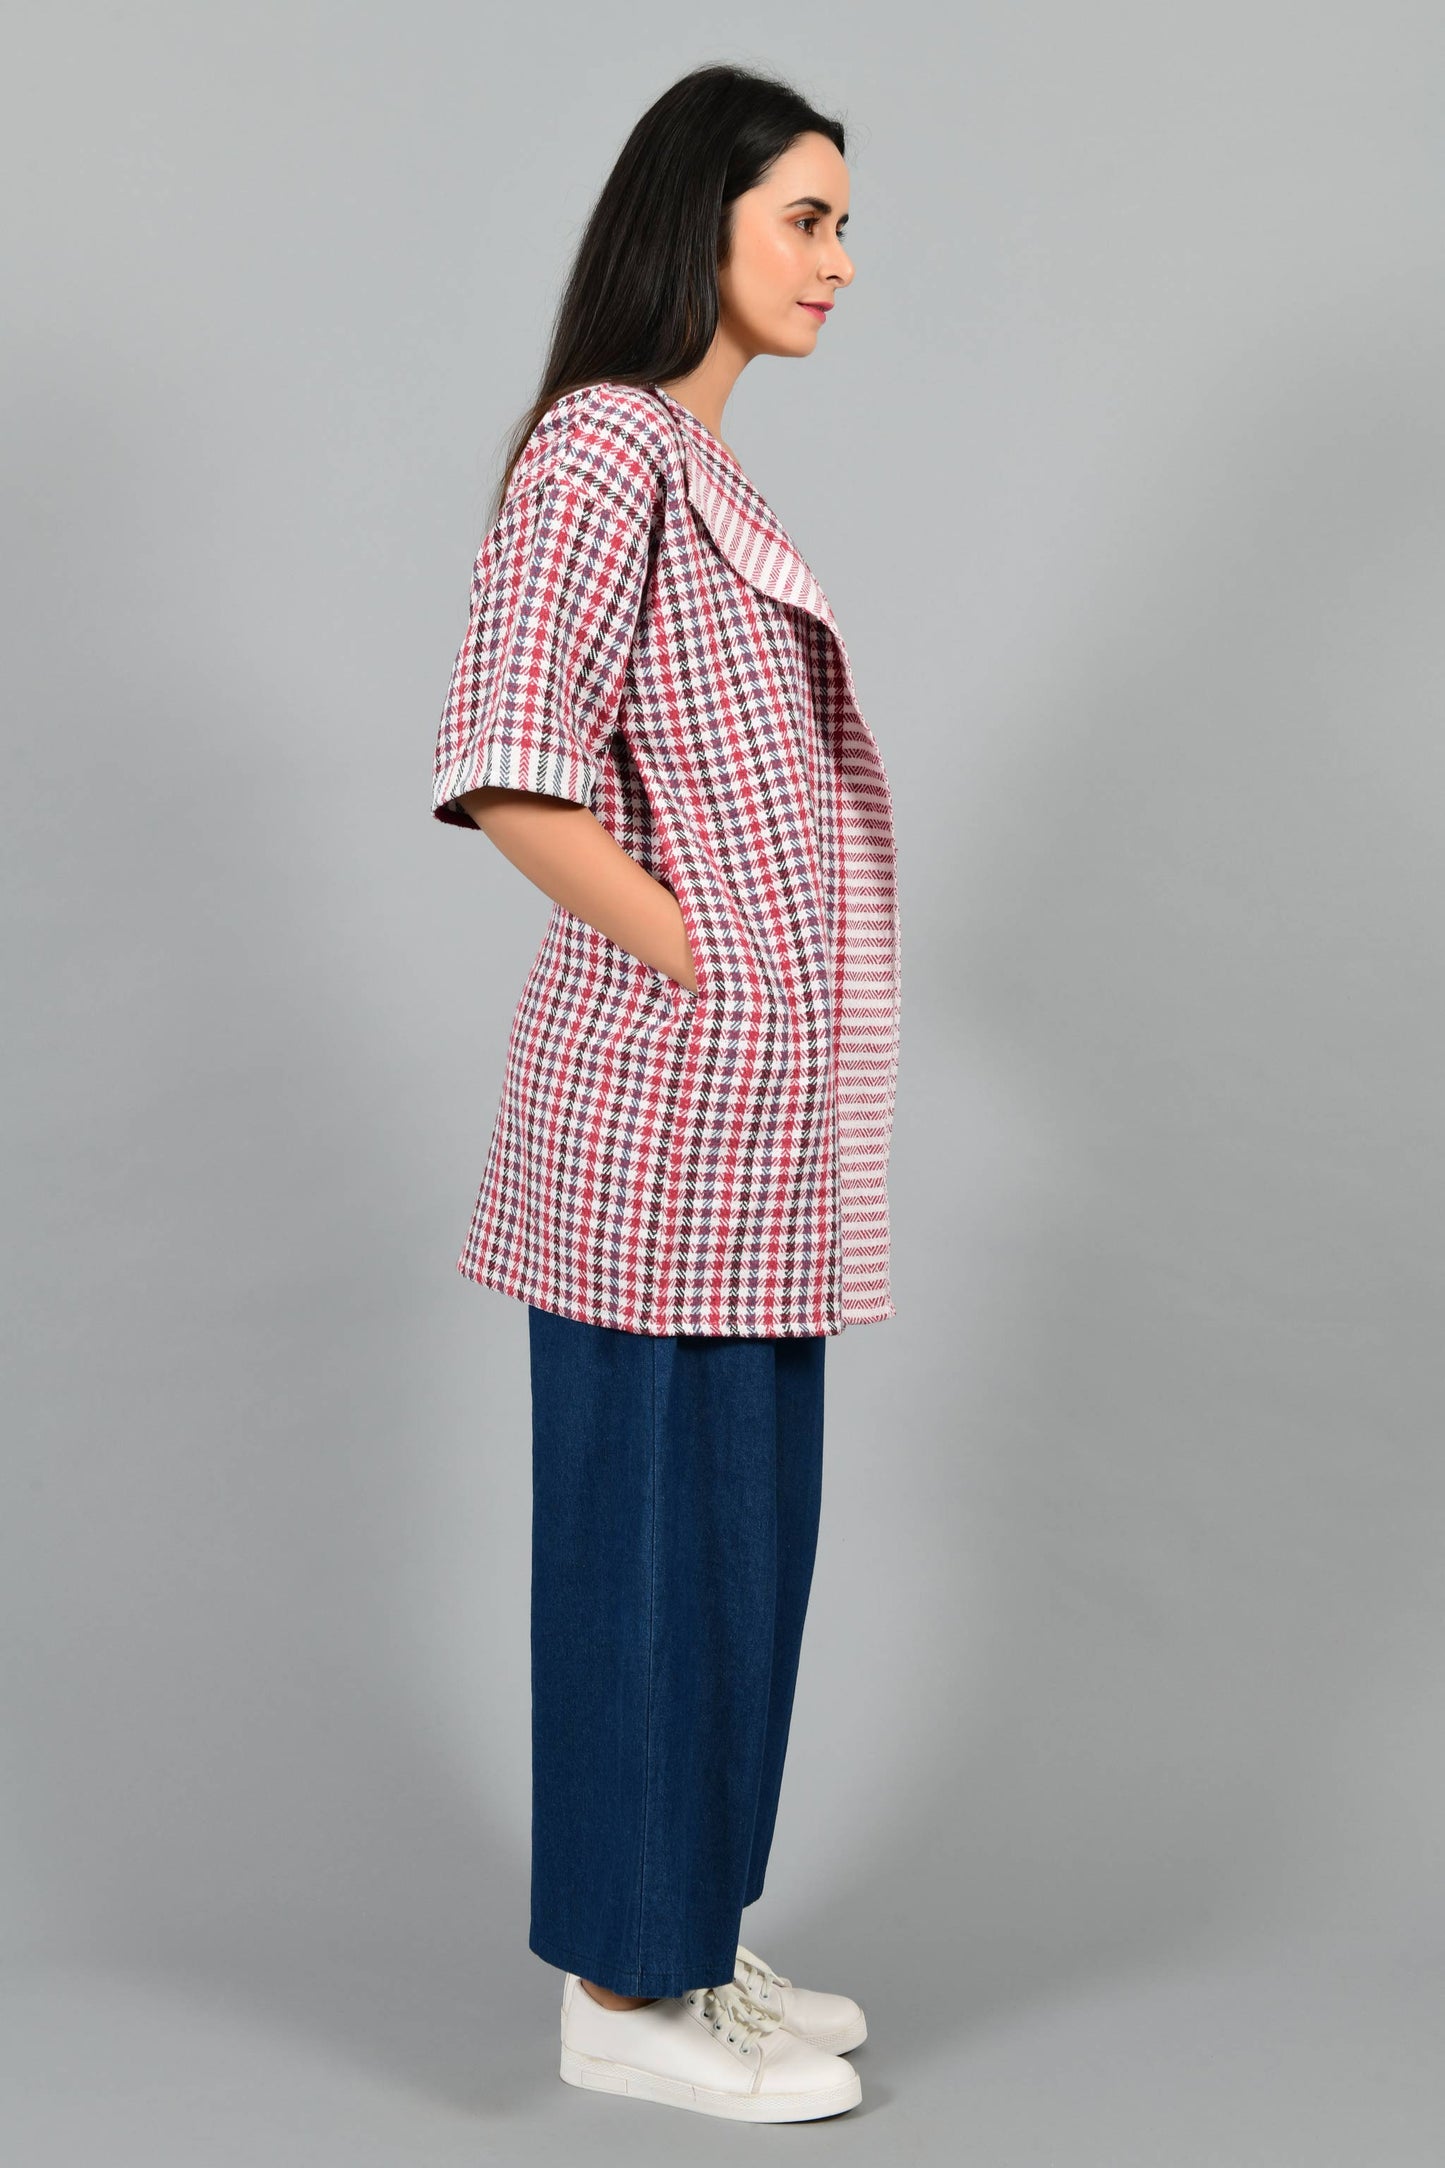 Side pose of an Indian Womenswear female model wearing Red and Blue handspun and handwoven khadi long Jacket over an off-white cashmere cotton dress by Cotton Rack.